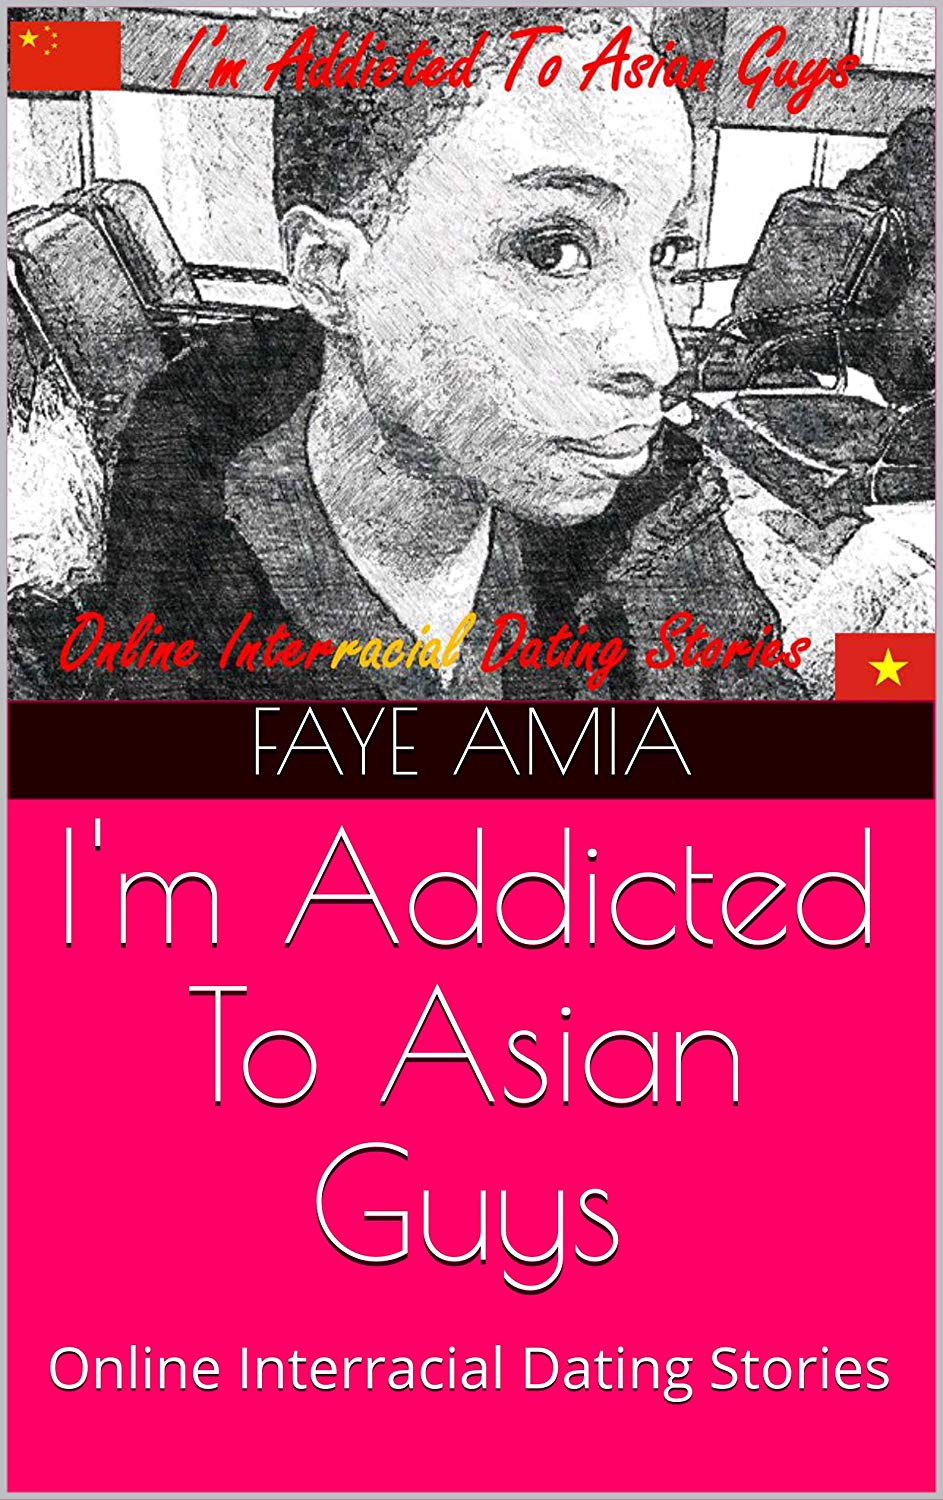 FREE: “I’m Addicted To Asian Guys: Online Interracial Dating Stories” by Faye Amia. by Faye Amia